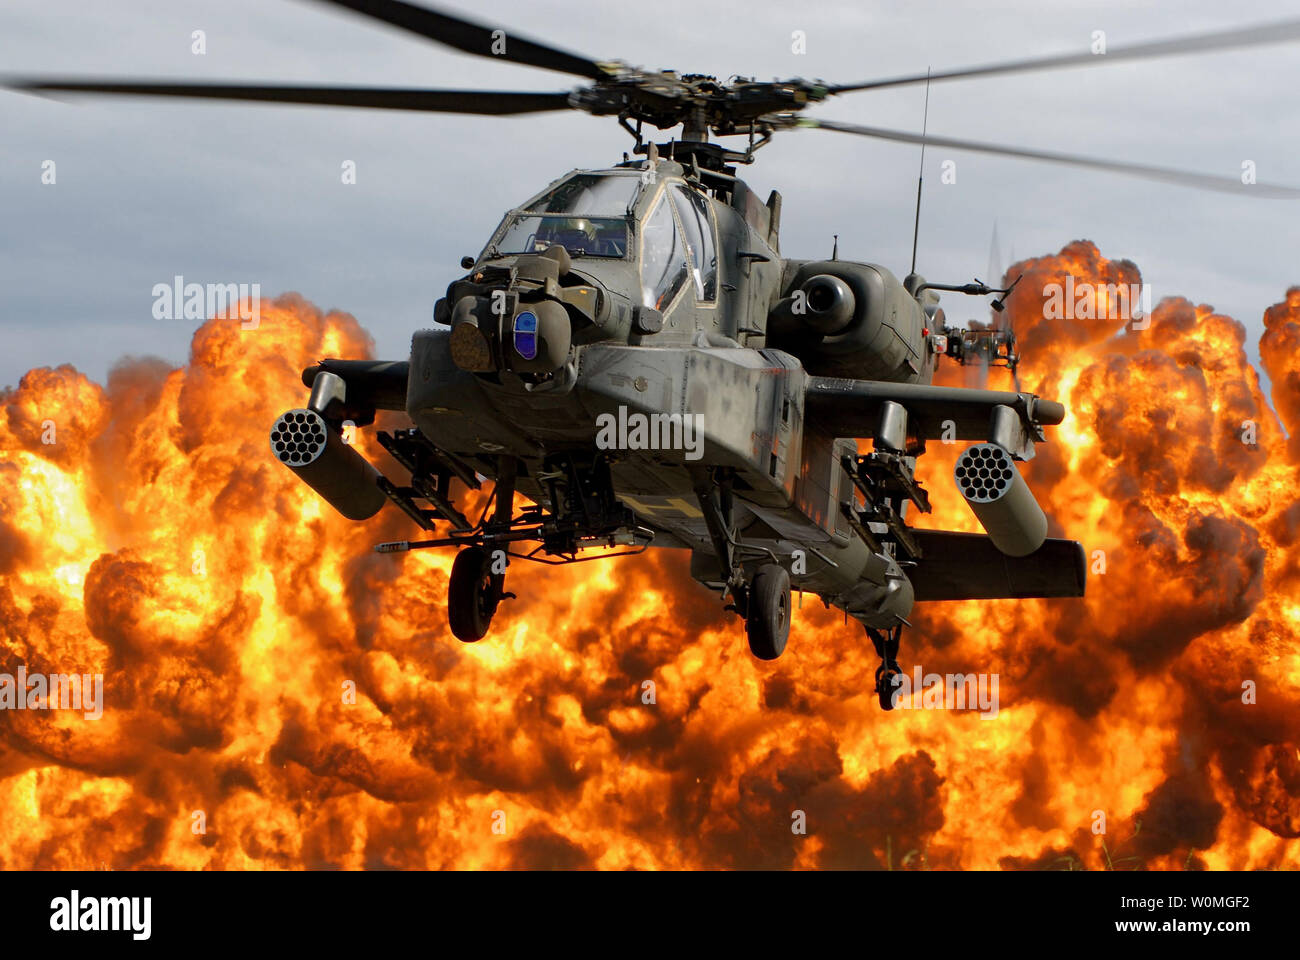 A South Carolina Army National Guard AH-64D Apache Longbow lands during the Combined Arms Demonstration during the South Carolina National Guard Air & Ground Expo 2009 at McEntire Joint National Guard Base in Eastover, South Carolina on October 10, 2009. UPI/Roberto Di Giovine/U.S. Army Stock Photo